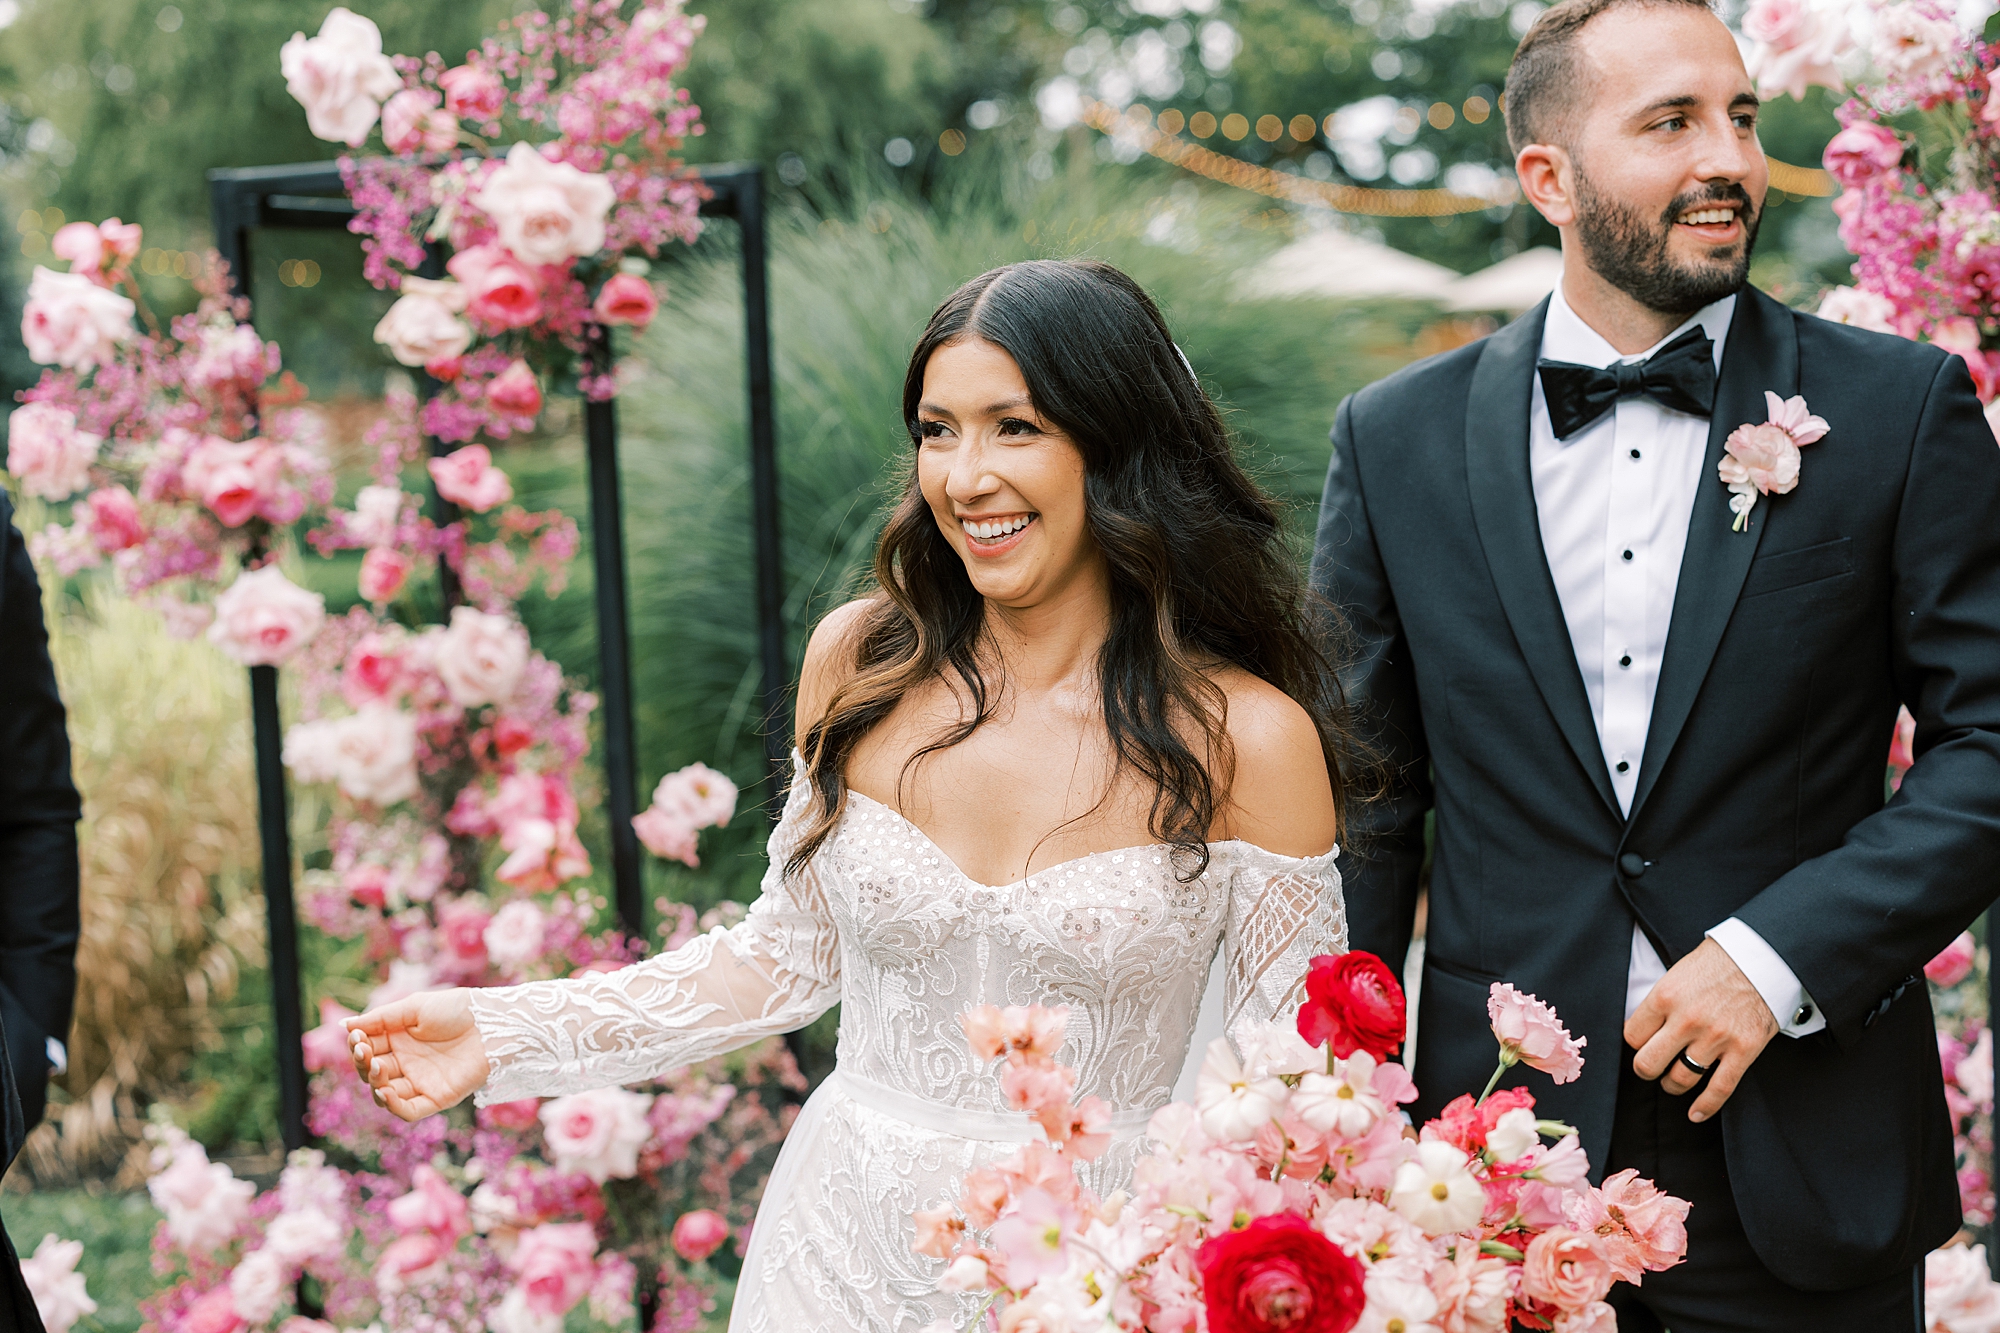 bride smiles in front of pink floral display at ceremony 